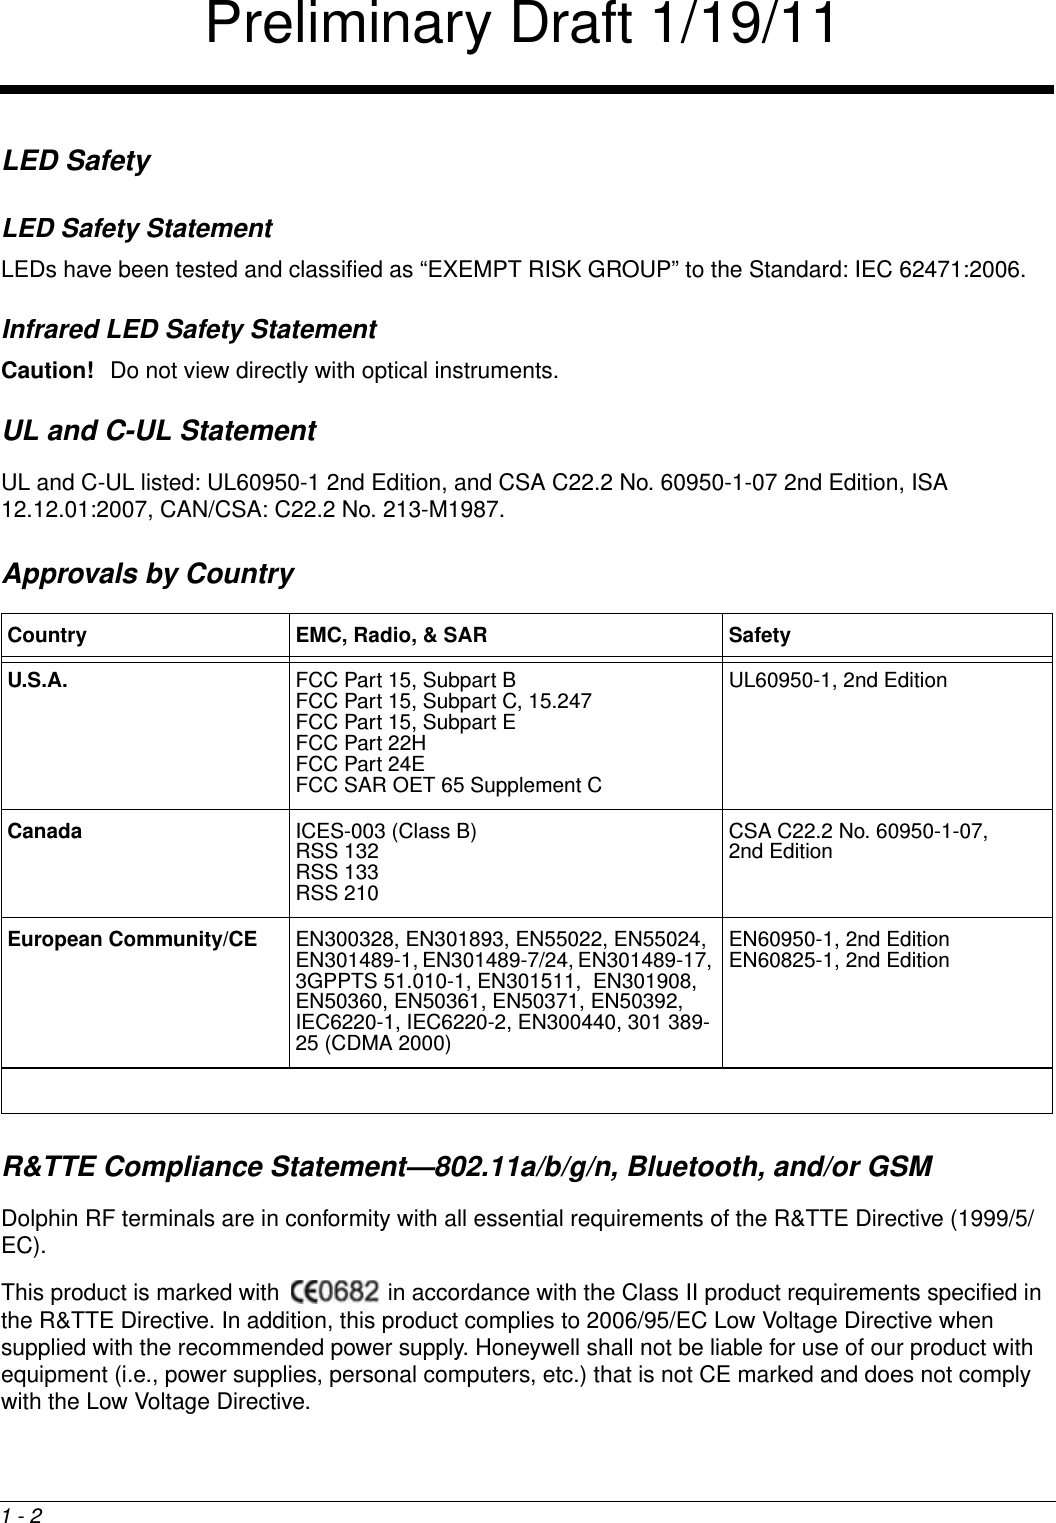 1 - 2LED SafetyLED Safety StatementLEDs have been tested and classified as “EXEMPT RISK GROUP” to the Standard: IEC 62471:2006.Infrared LED Safety StatementCaution!  Do not view directly with optical instruments. UL and C-UL StatementUL and C-UL listed: UL60950-1 2nd Edition, and CSA C22.2 No. 60950-1-07 2nd Edition, ISA 12.12.01:2007, CAN/CSA: C22.2 No. 213-M1987.Approvals by Country R&amp;TTE Compliance Statement—802.11a/b/g/n, Bluetooth, and/or GSMDolphin RF terminals are in conformity with all essential requirements of the R&amp;TTE Directive (1999/5/EC). This product is marked with   in accordance with the Class II product requirements specified in the R&amp;TTE Directive. In addition, this product complies to 2006/95/EC Low Voltage Directive when supplied with the recommended power supply. Honeywell shall not be liable for use of our product with equipment (i.e., power supplies, personal computers, etc.) that is not CE marked and does not comply with the Low Voltage Directive.Country EMC, Radio, &amp; SAR SafetyU.S.A. FCC Part 15, Subpart BFCC Part 15, Subpart C, 15.247FCC Part 15, Subpart EFCC Part 22HFCC Part 24EFCC SAR OET 65 Supplement CUL60950-1, 2nd EditionCanada ICES-003 (Class B)RSS 132RSS 133RSS 210CSA C22.2 No. 60950-1-07,2nd EditionEuropean Community/CE EN300328, EN301893, EN55022, EN55024, EN301489-1, EN301489-7/24, EN301489-17, 3GPPTS 51.010-1, EN301511,  EN301908, EN50360, EN50361, EN50371, EN50392, IEC6220-1, IEC6220-2, EN300440, 301 389-25 (CDMA 2000)EN60950-1, 2nd EditionEN60825-1, 2nd EditionPreliminary Draft 1/19/11